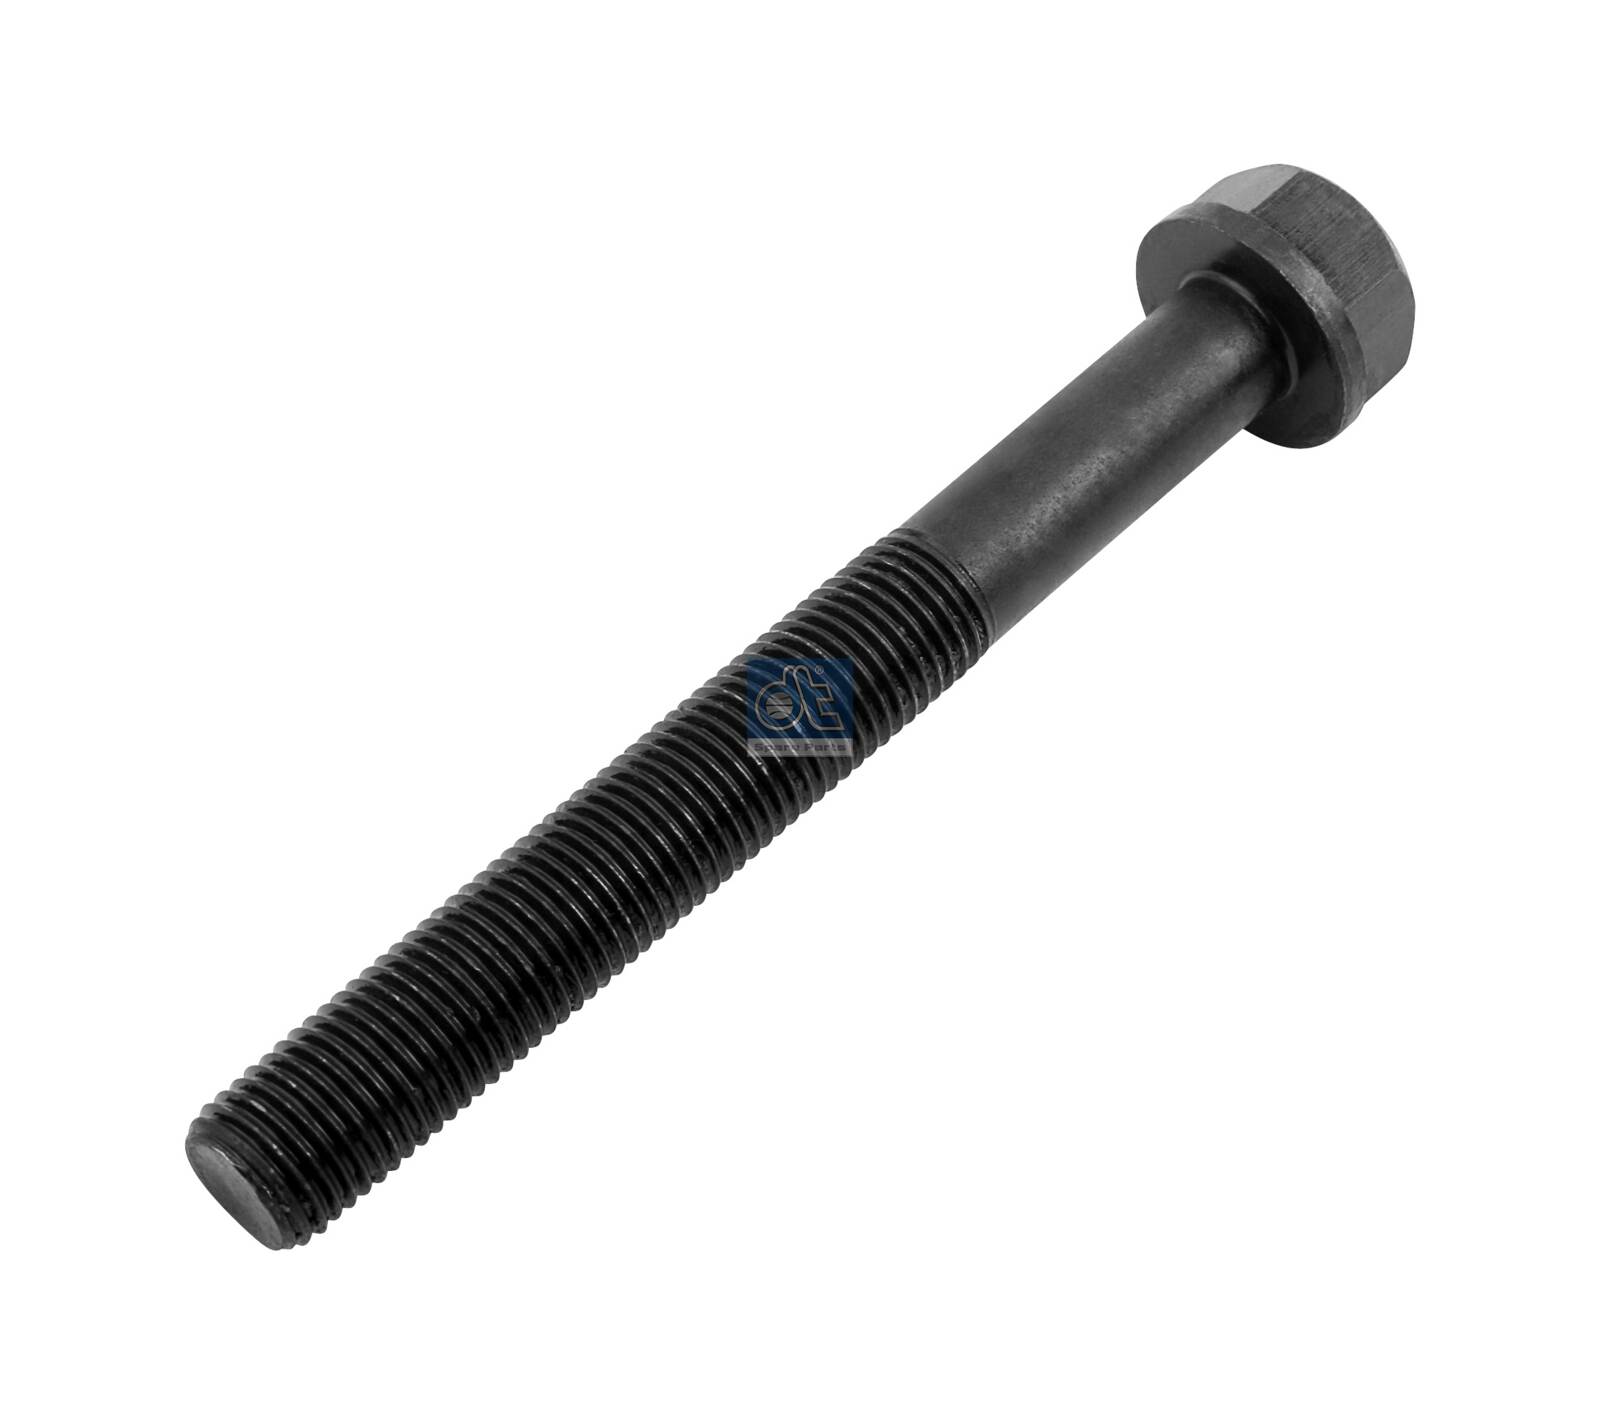 4.40127, Screw, DT Spare Parts, 4220110071, 4570110071, 51.90020.0293, 4220110271, 51.90020.0126, 4470110071, 51900200293, 51900200126, 4030110271, A4220110071, A4220110271, A4030110271, A4570110071, A4470110071, 100002, 10734, 20010342200, 20017111, 100.002, 20.0103.42200, 20010225000, 20.0102.25000, 4057795050952, 4.40127